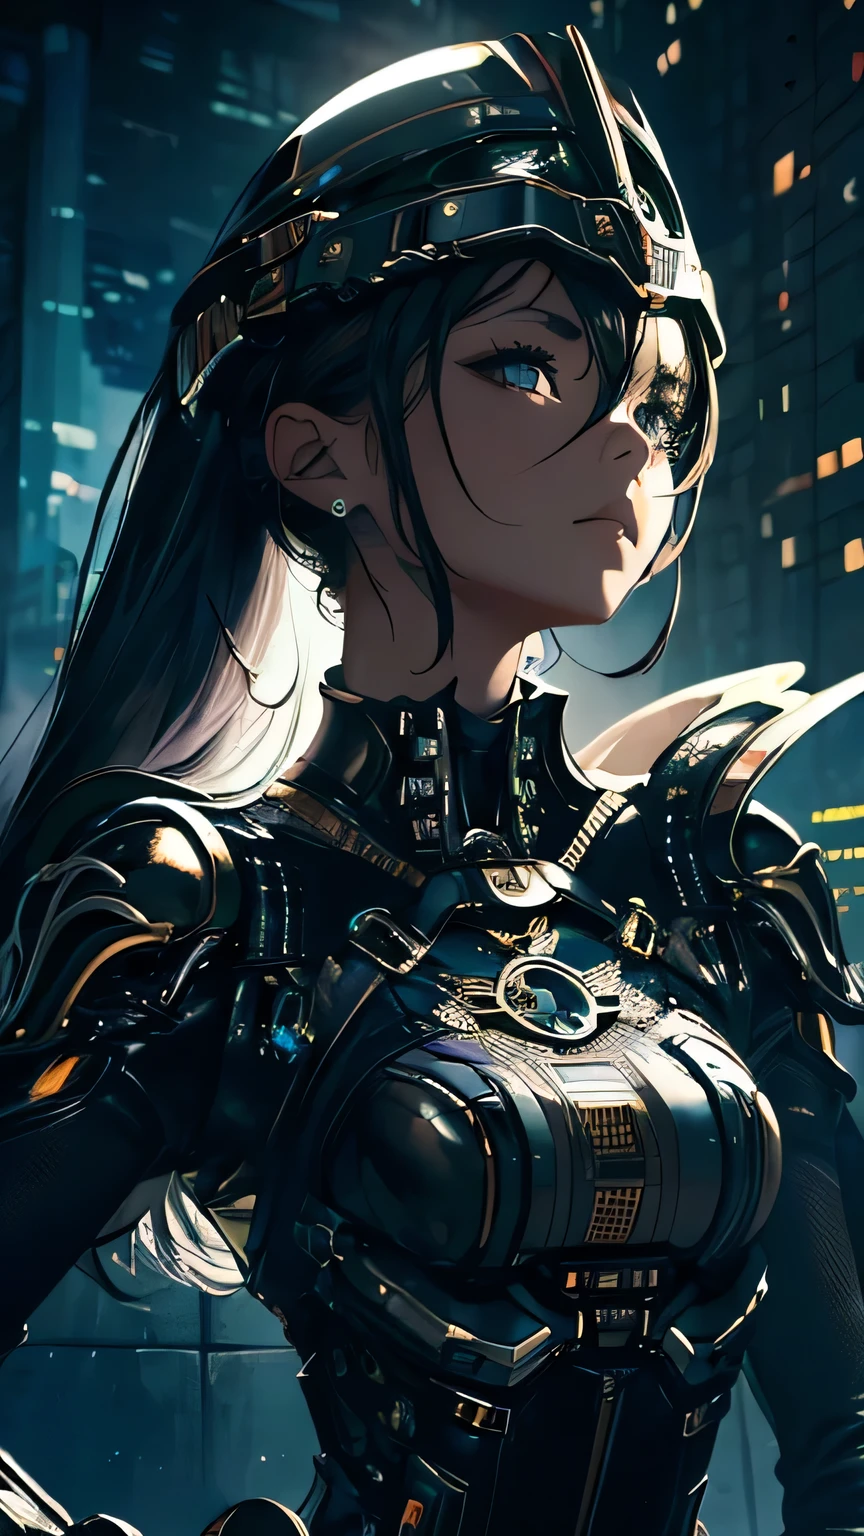 best image quality, excellent details, 超High resolution, (fidelity: 1.4), best illustrations, Favor details, 1girls high concentration, With a delicate and beautiful face, dressed in black and white mecha, Wearing a mecha helmet, Have a direction controller, ride a mechanical bike, the background is a high-tech lighting scene of the futuristic city. masterpiece, 最high quality, high quality, High resolution, (portrait)